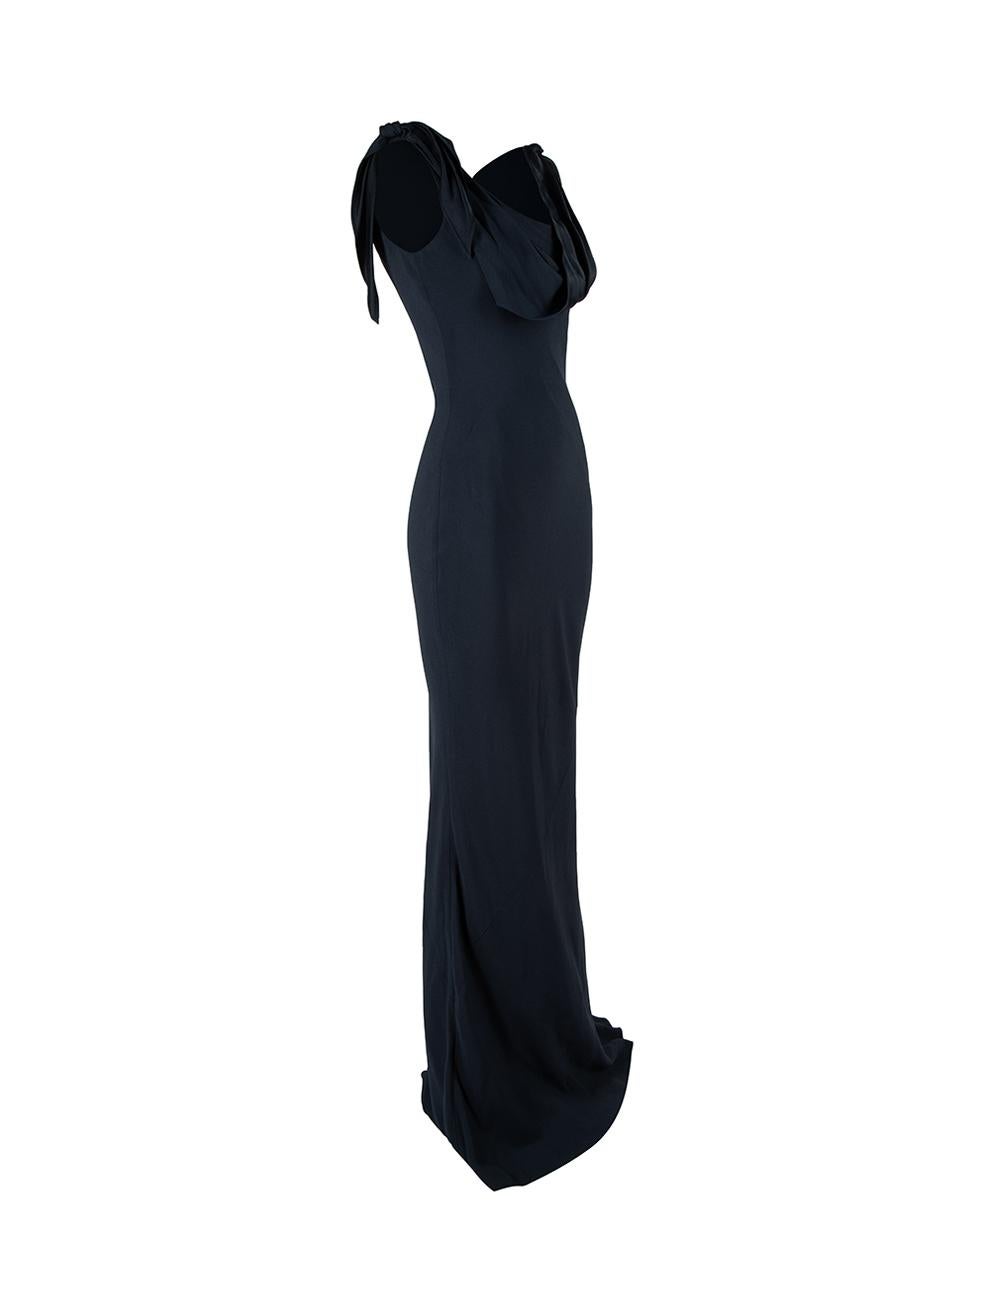 CONDITION is Very good. Minimal wear to dress is evident. Minimal wear to the lining and neckline with marks on this used Dior designer resale item.



Details


Navy

Synthetic

Maxi gown

Asymmetric cowl neckline

Bow detail on shoulder